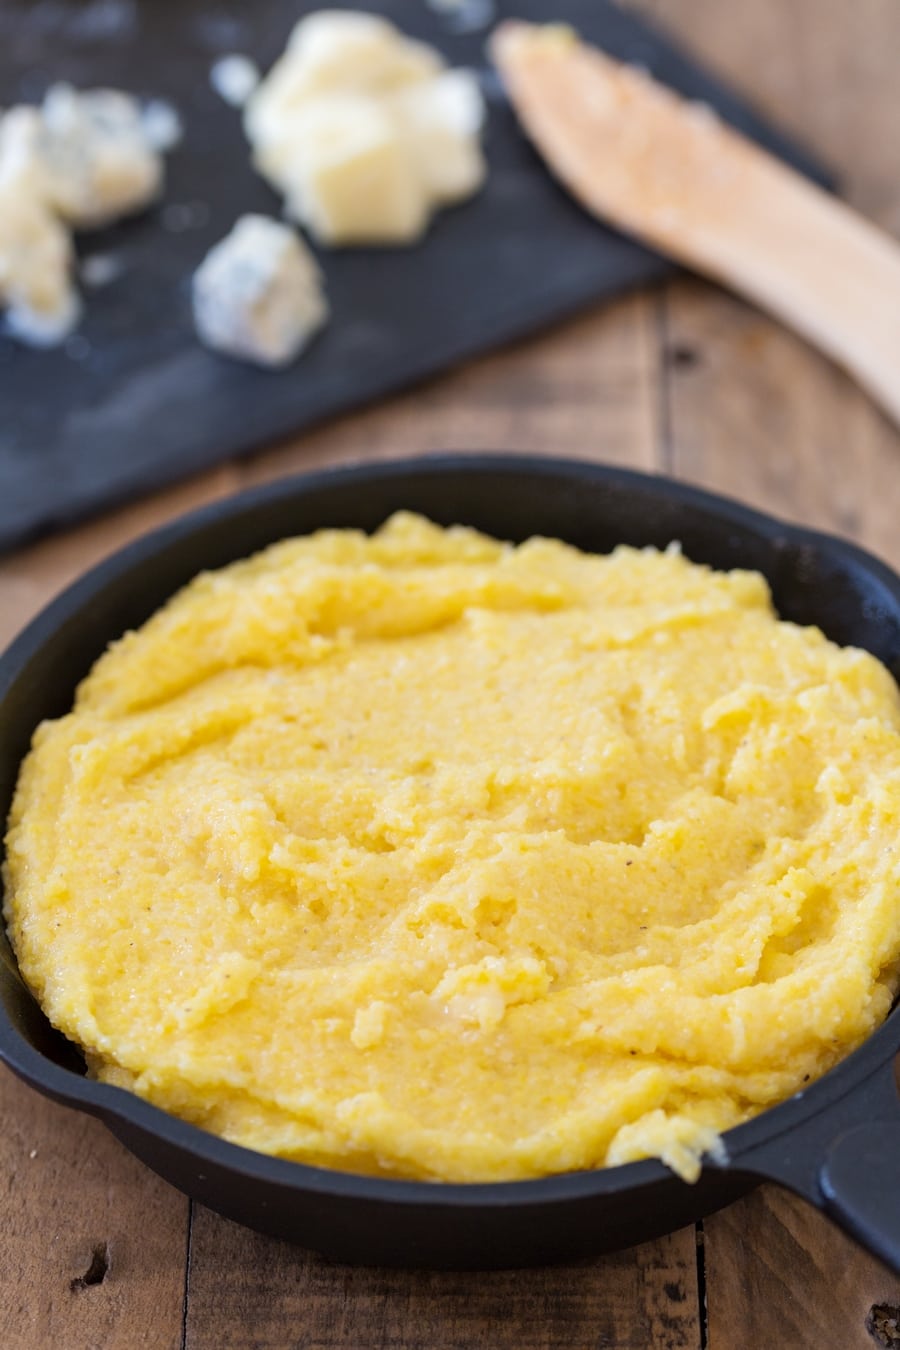 Skillet of polenta filled with cheese.